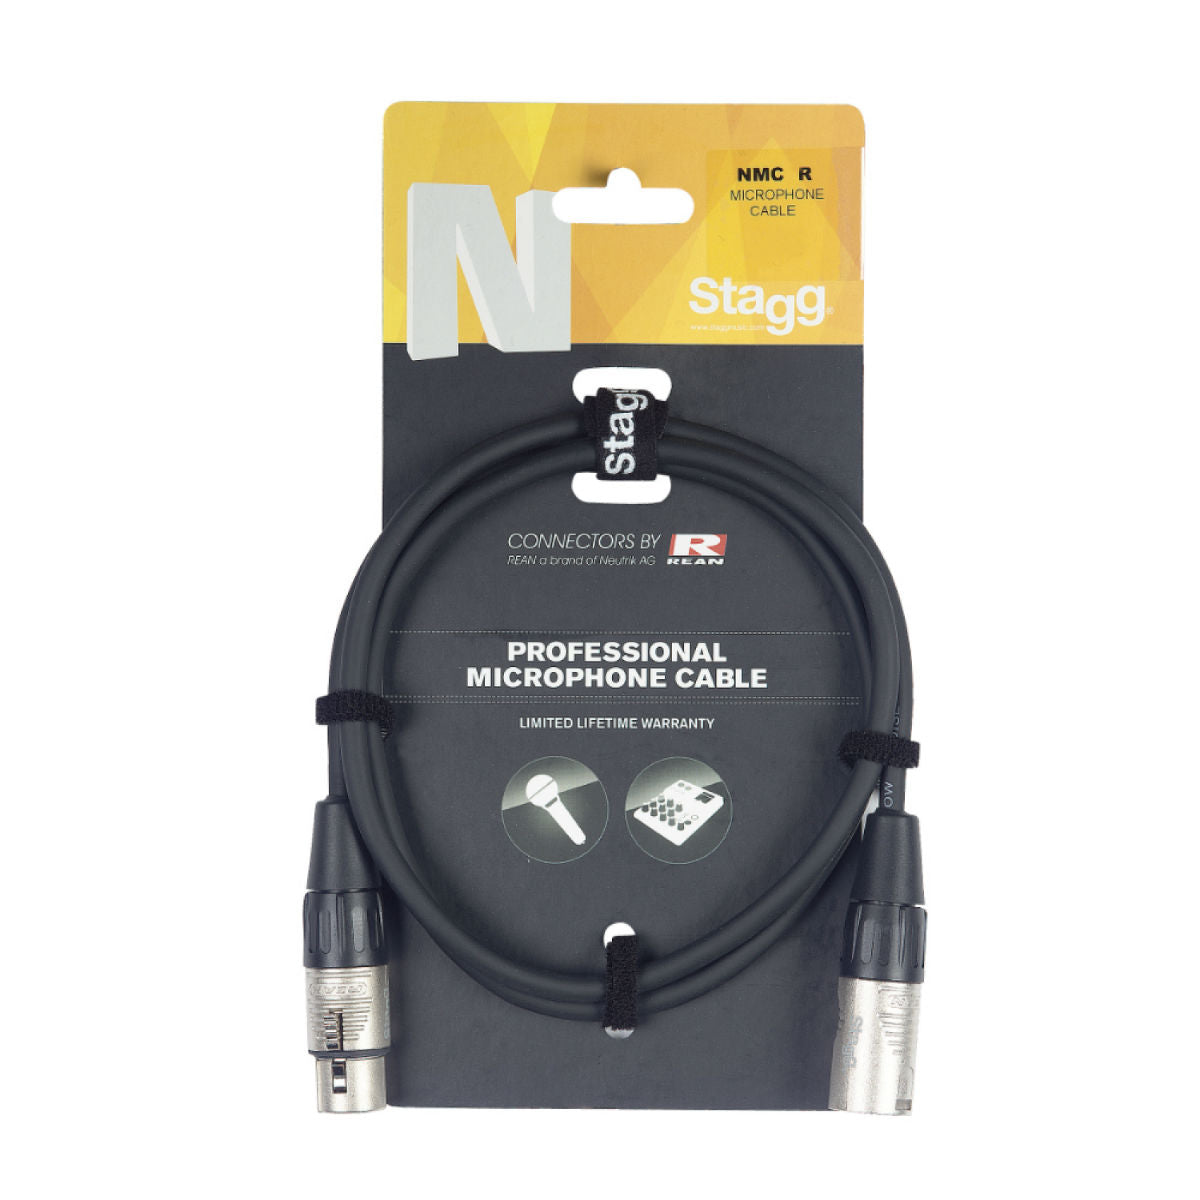 Stagg NMC1R Microphone Cable 1m